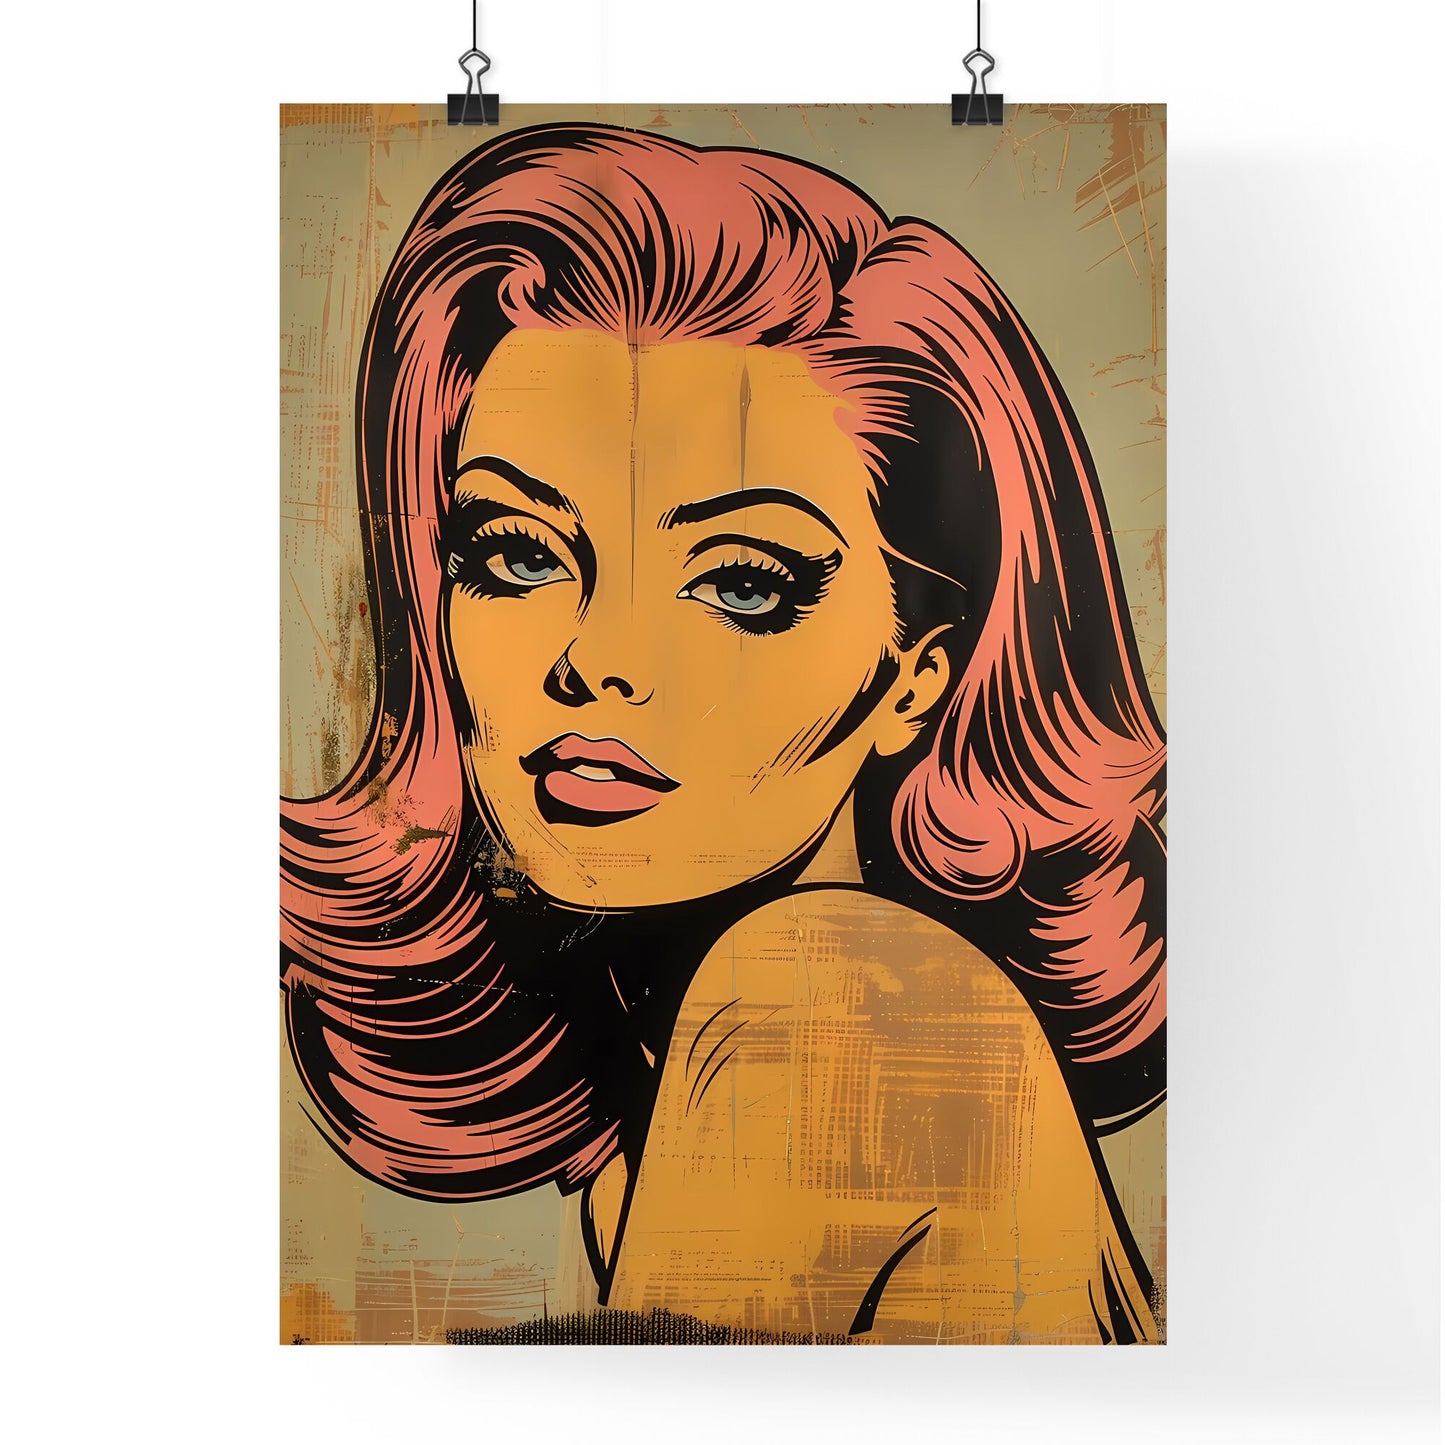 Vibrant Retro Pop Art Painting Poster with Light Pink Haired Woman from 1950s Comics Default Title